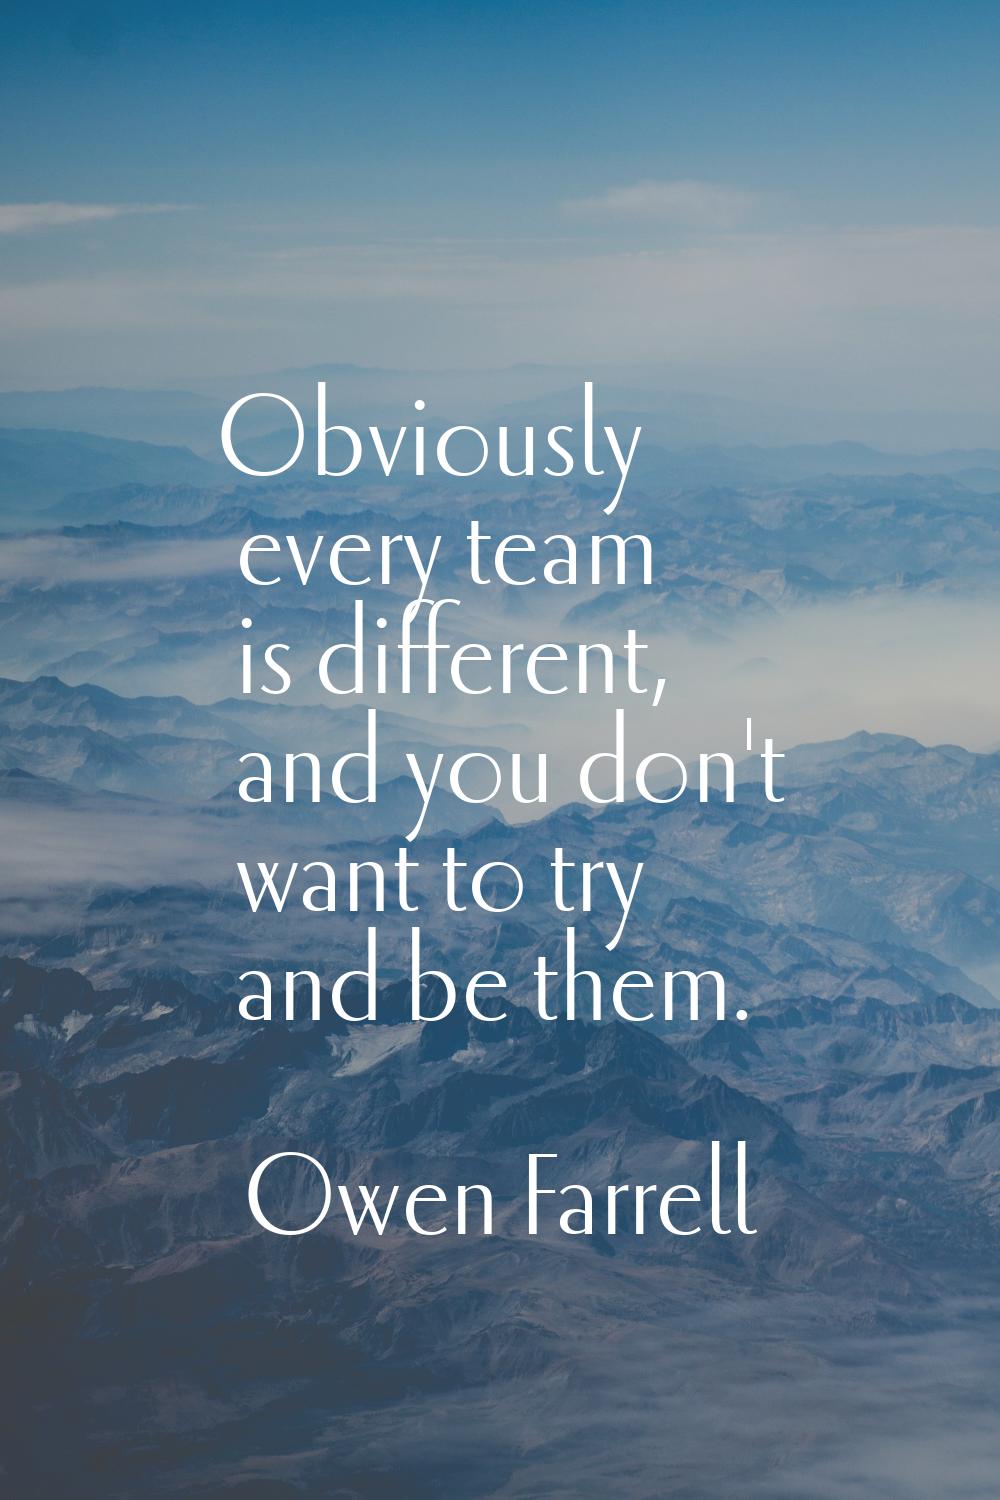 Obviously every team is different, and you don't want to try and be them.